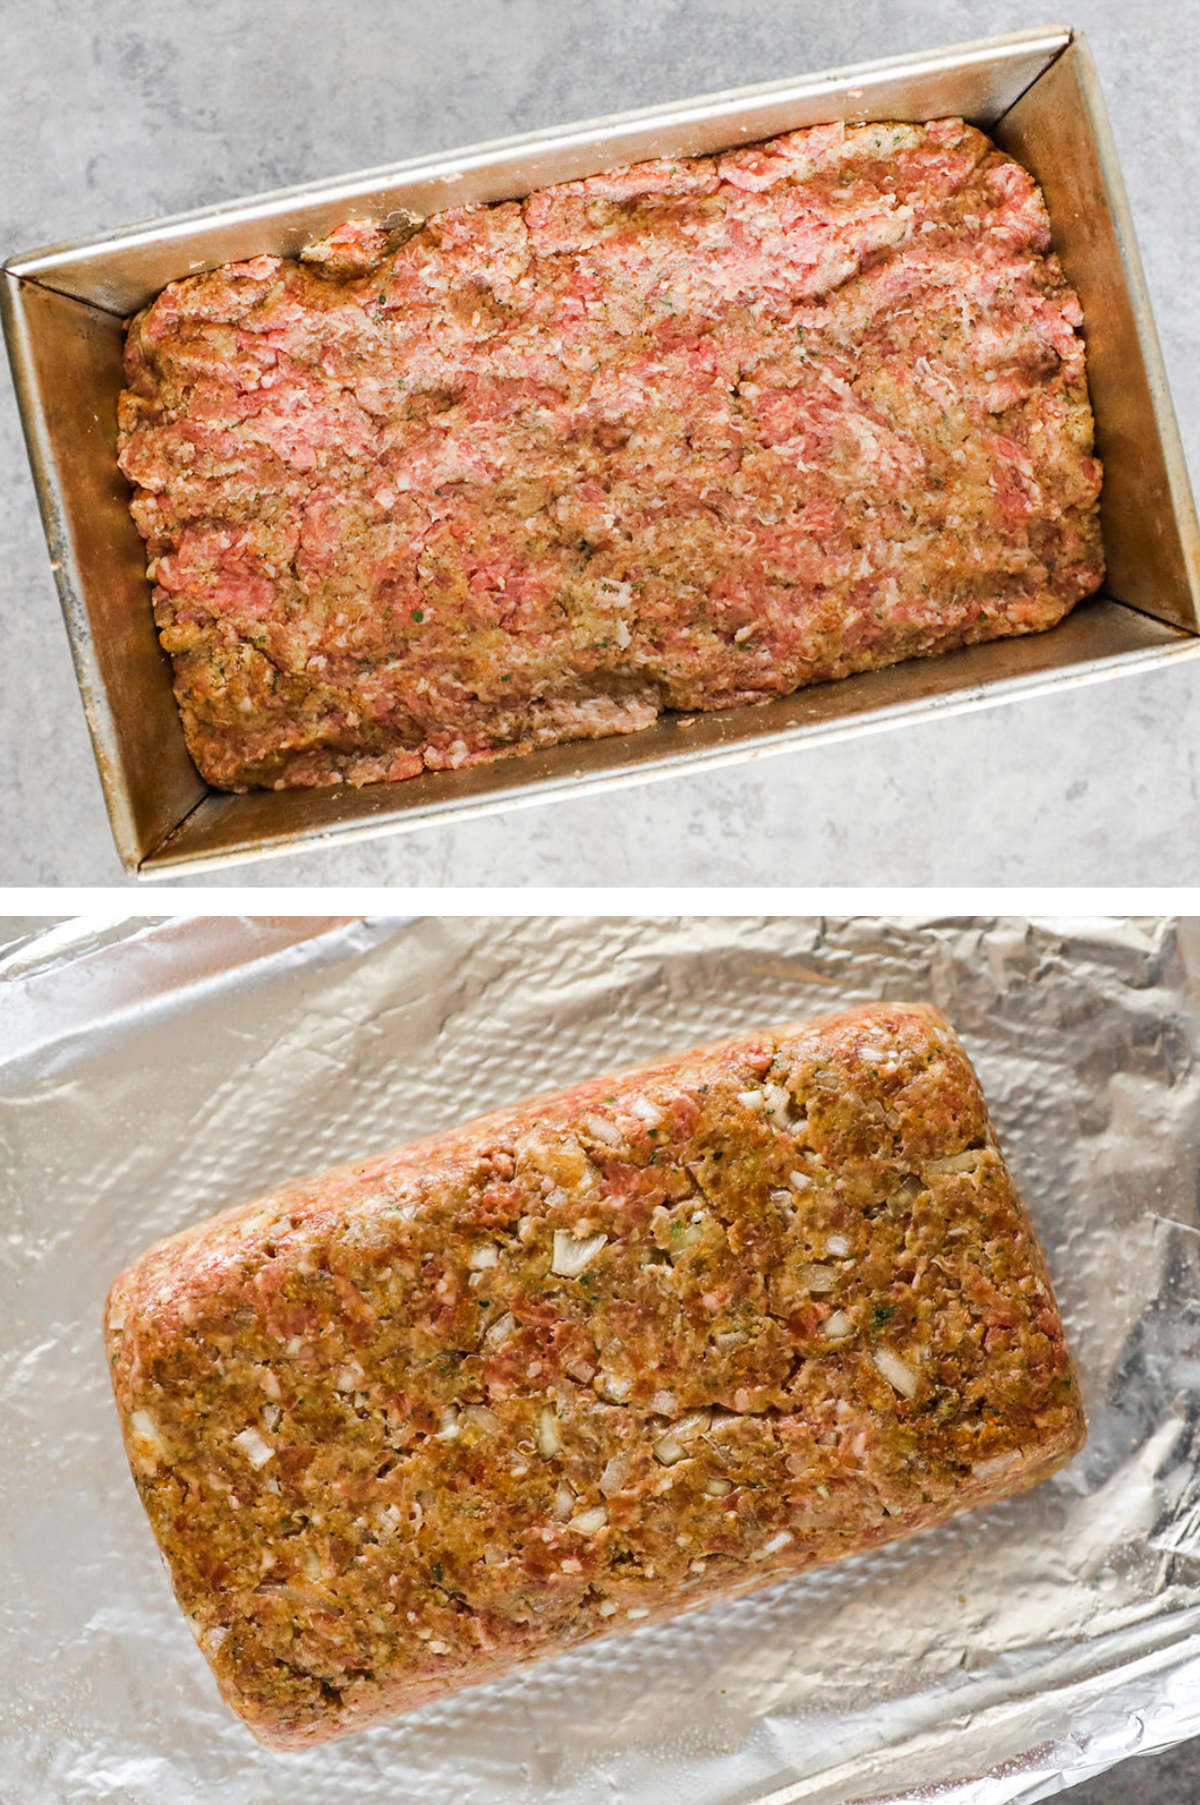 Two overhead images in one: 1. Loaf is packed into a loaf pan. 2. Loaf is flipped and placed on foil on a baking sheet. 